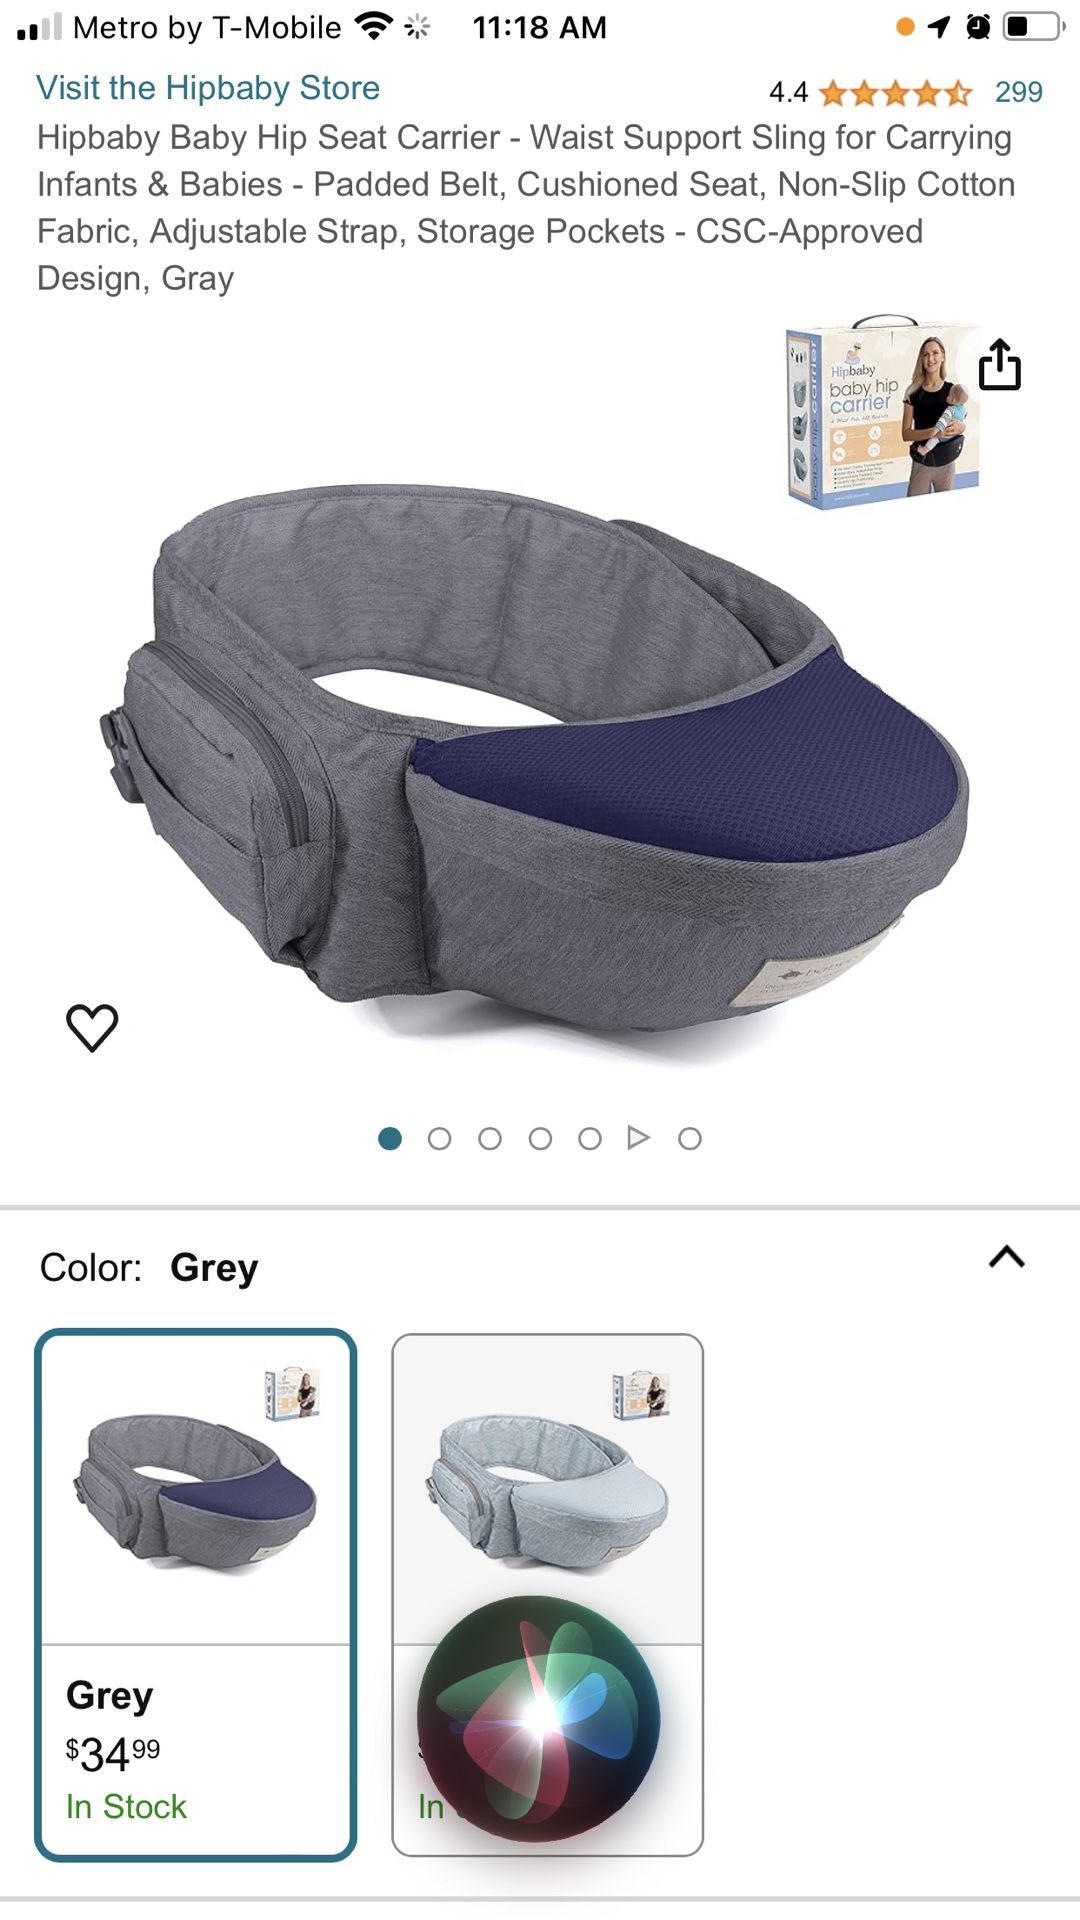 Hipbaby Baby Hip Seat Carrier 